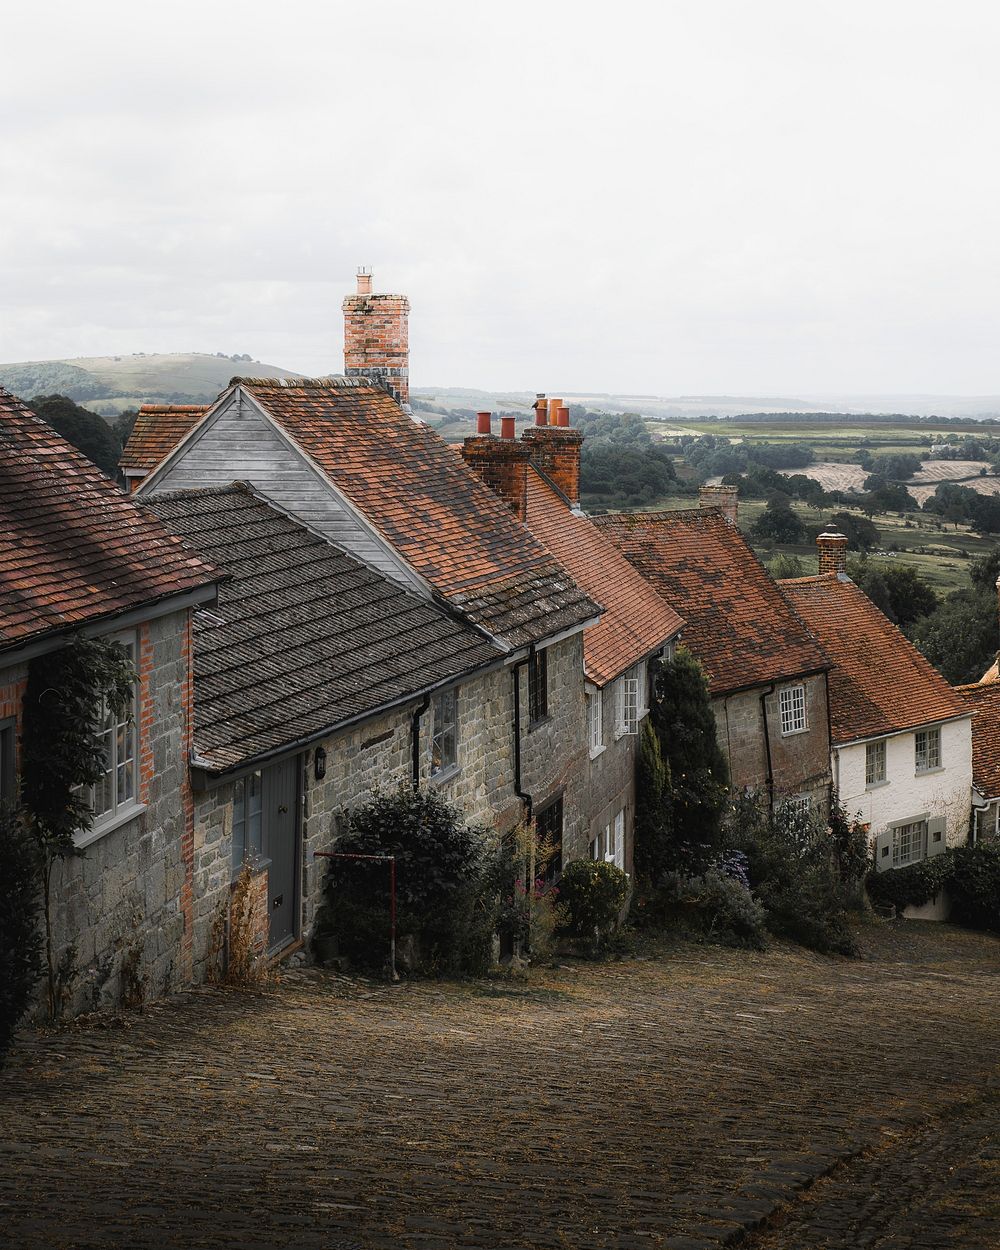 Old English village at Shaftesbury town in Dorset, England